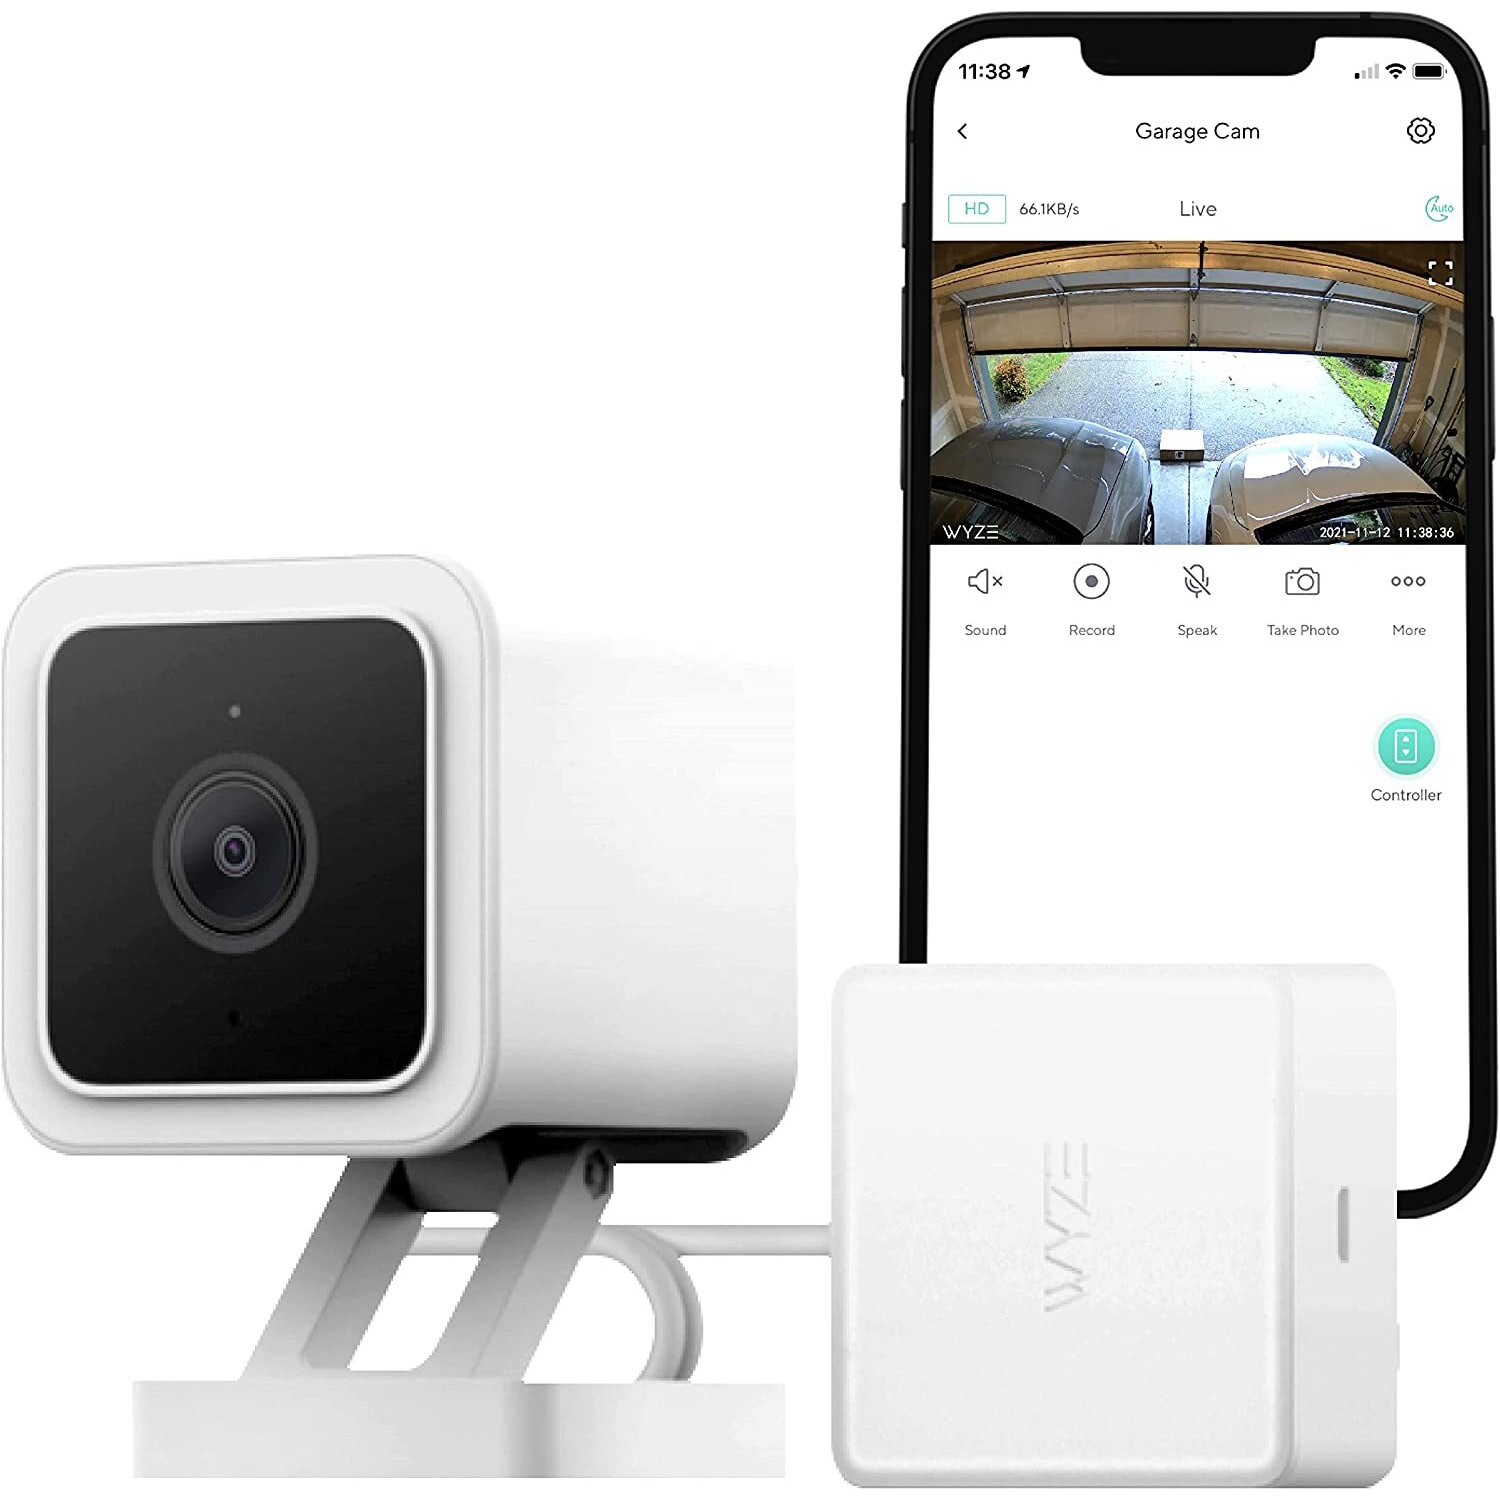 How to Reconnect My Wyze Camera: Easy Troubleshooting Tips